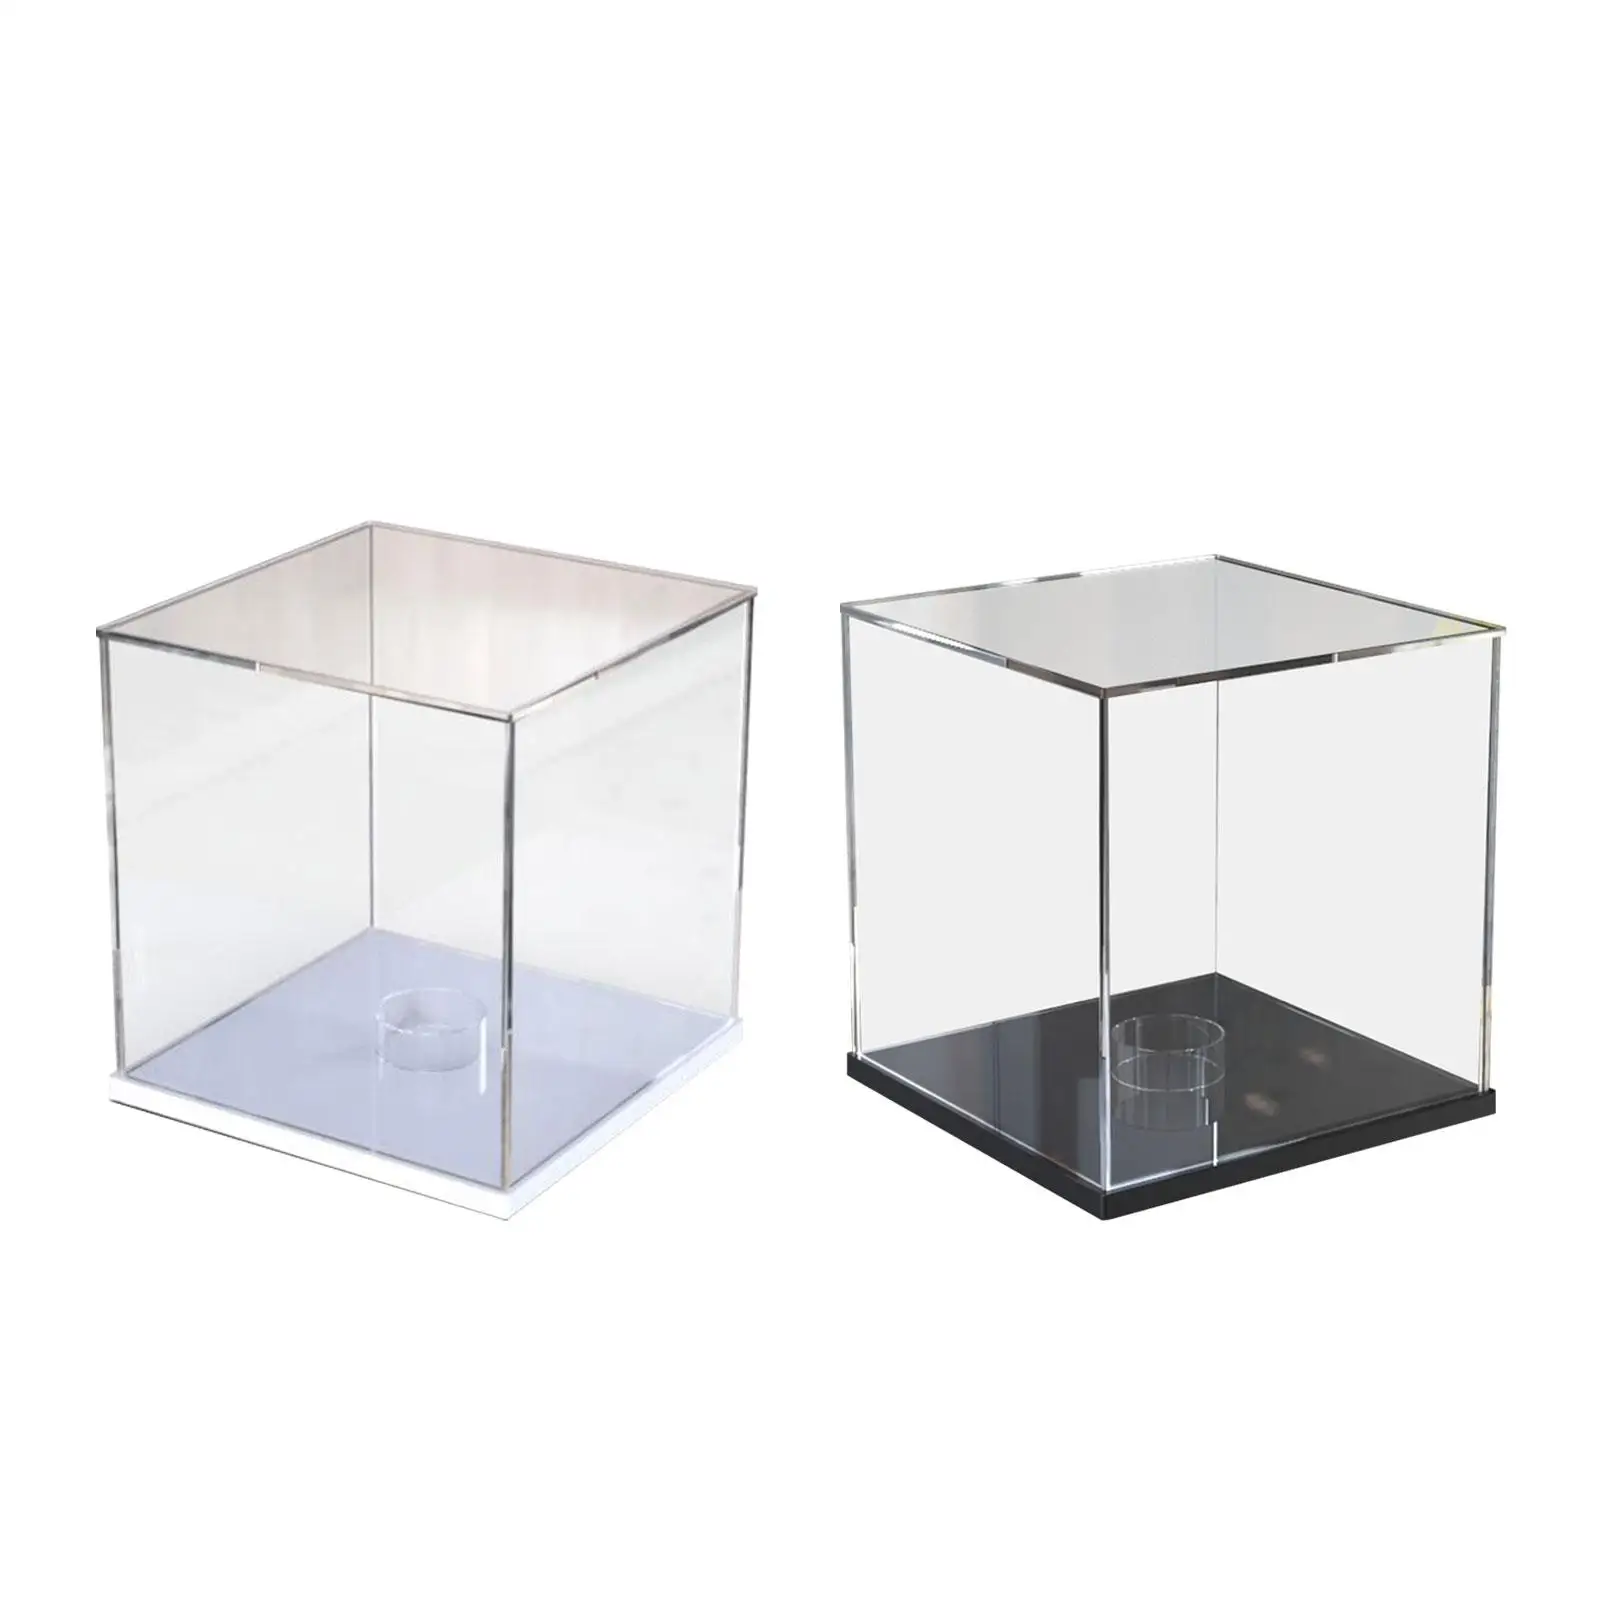 Football Display Cabinet Acrylic Soccer Memorabilia Holder Display Case for Statues Sculptures Baseball Toys Collectibles